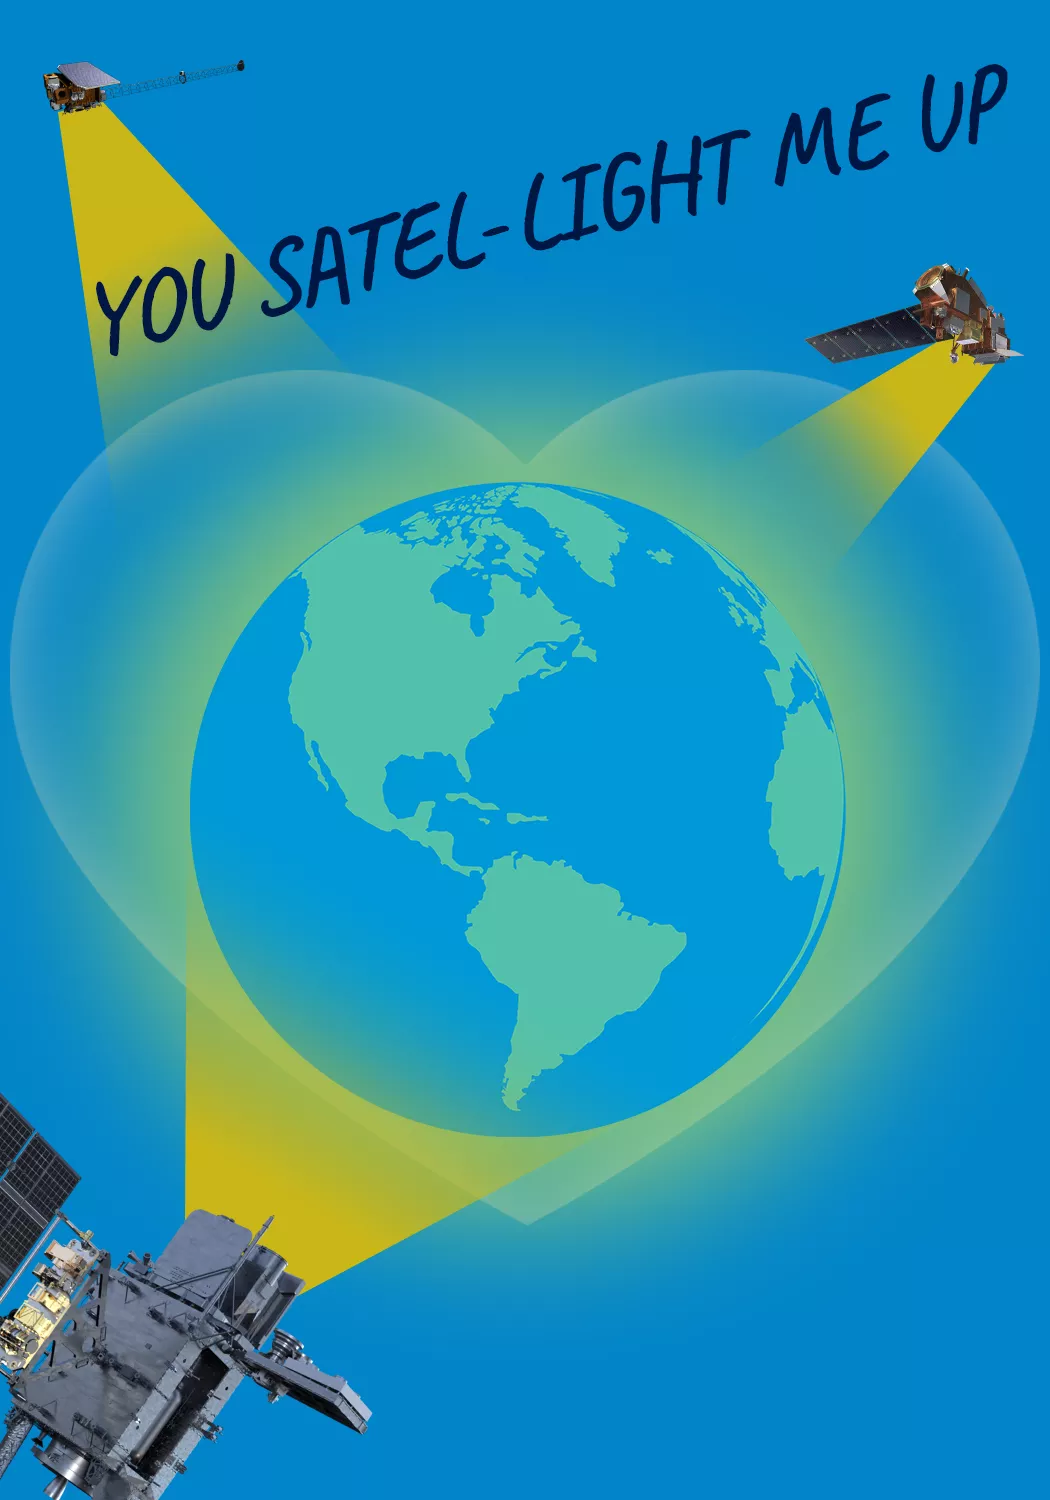 image of a satellite projecting light onto the earth with the text "You Satel-light me up!"